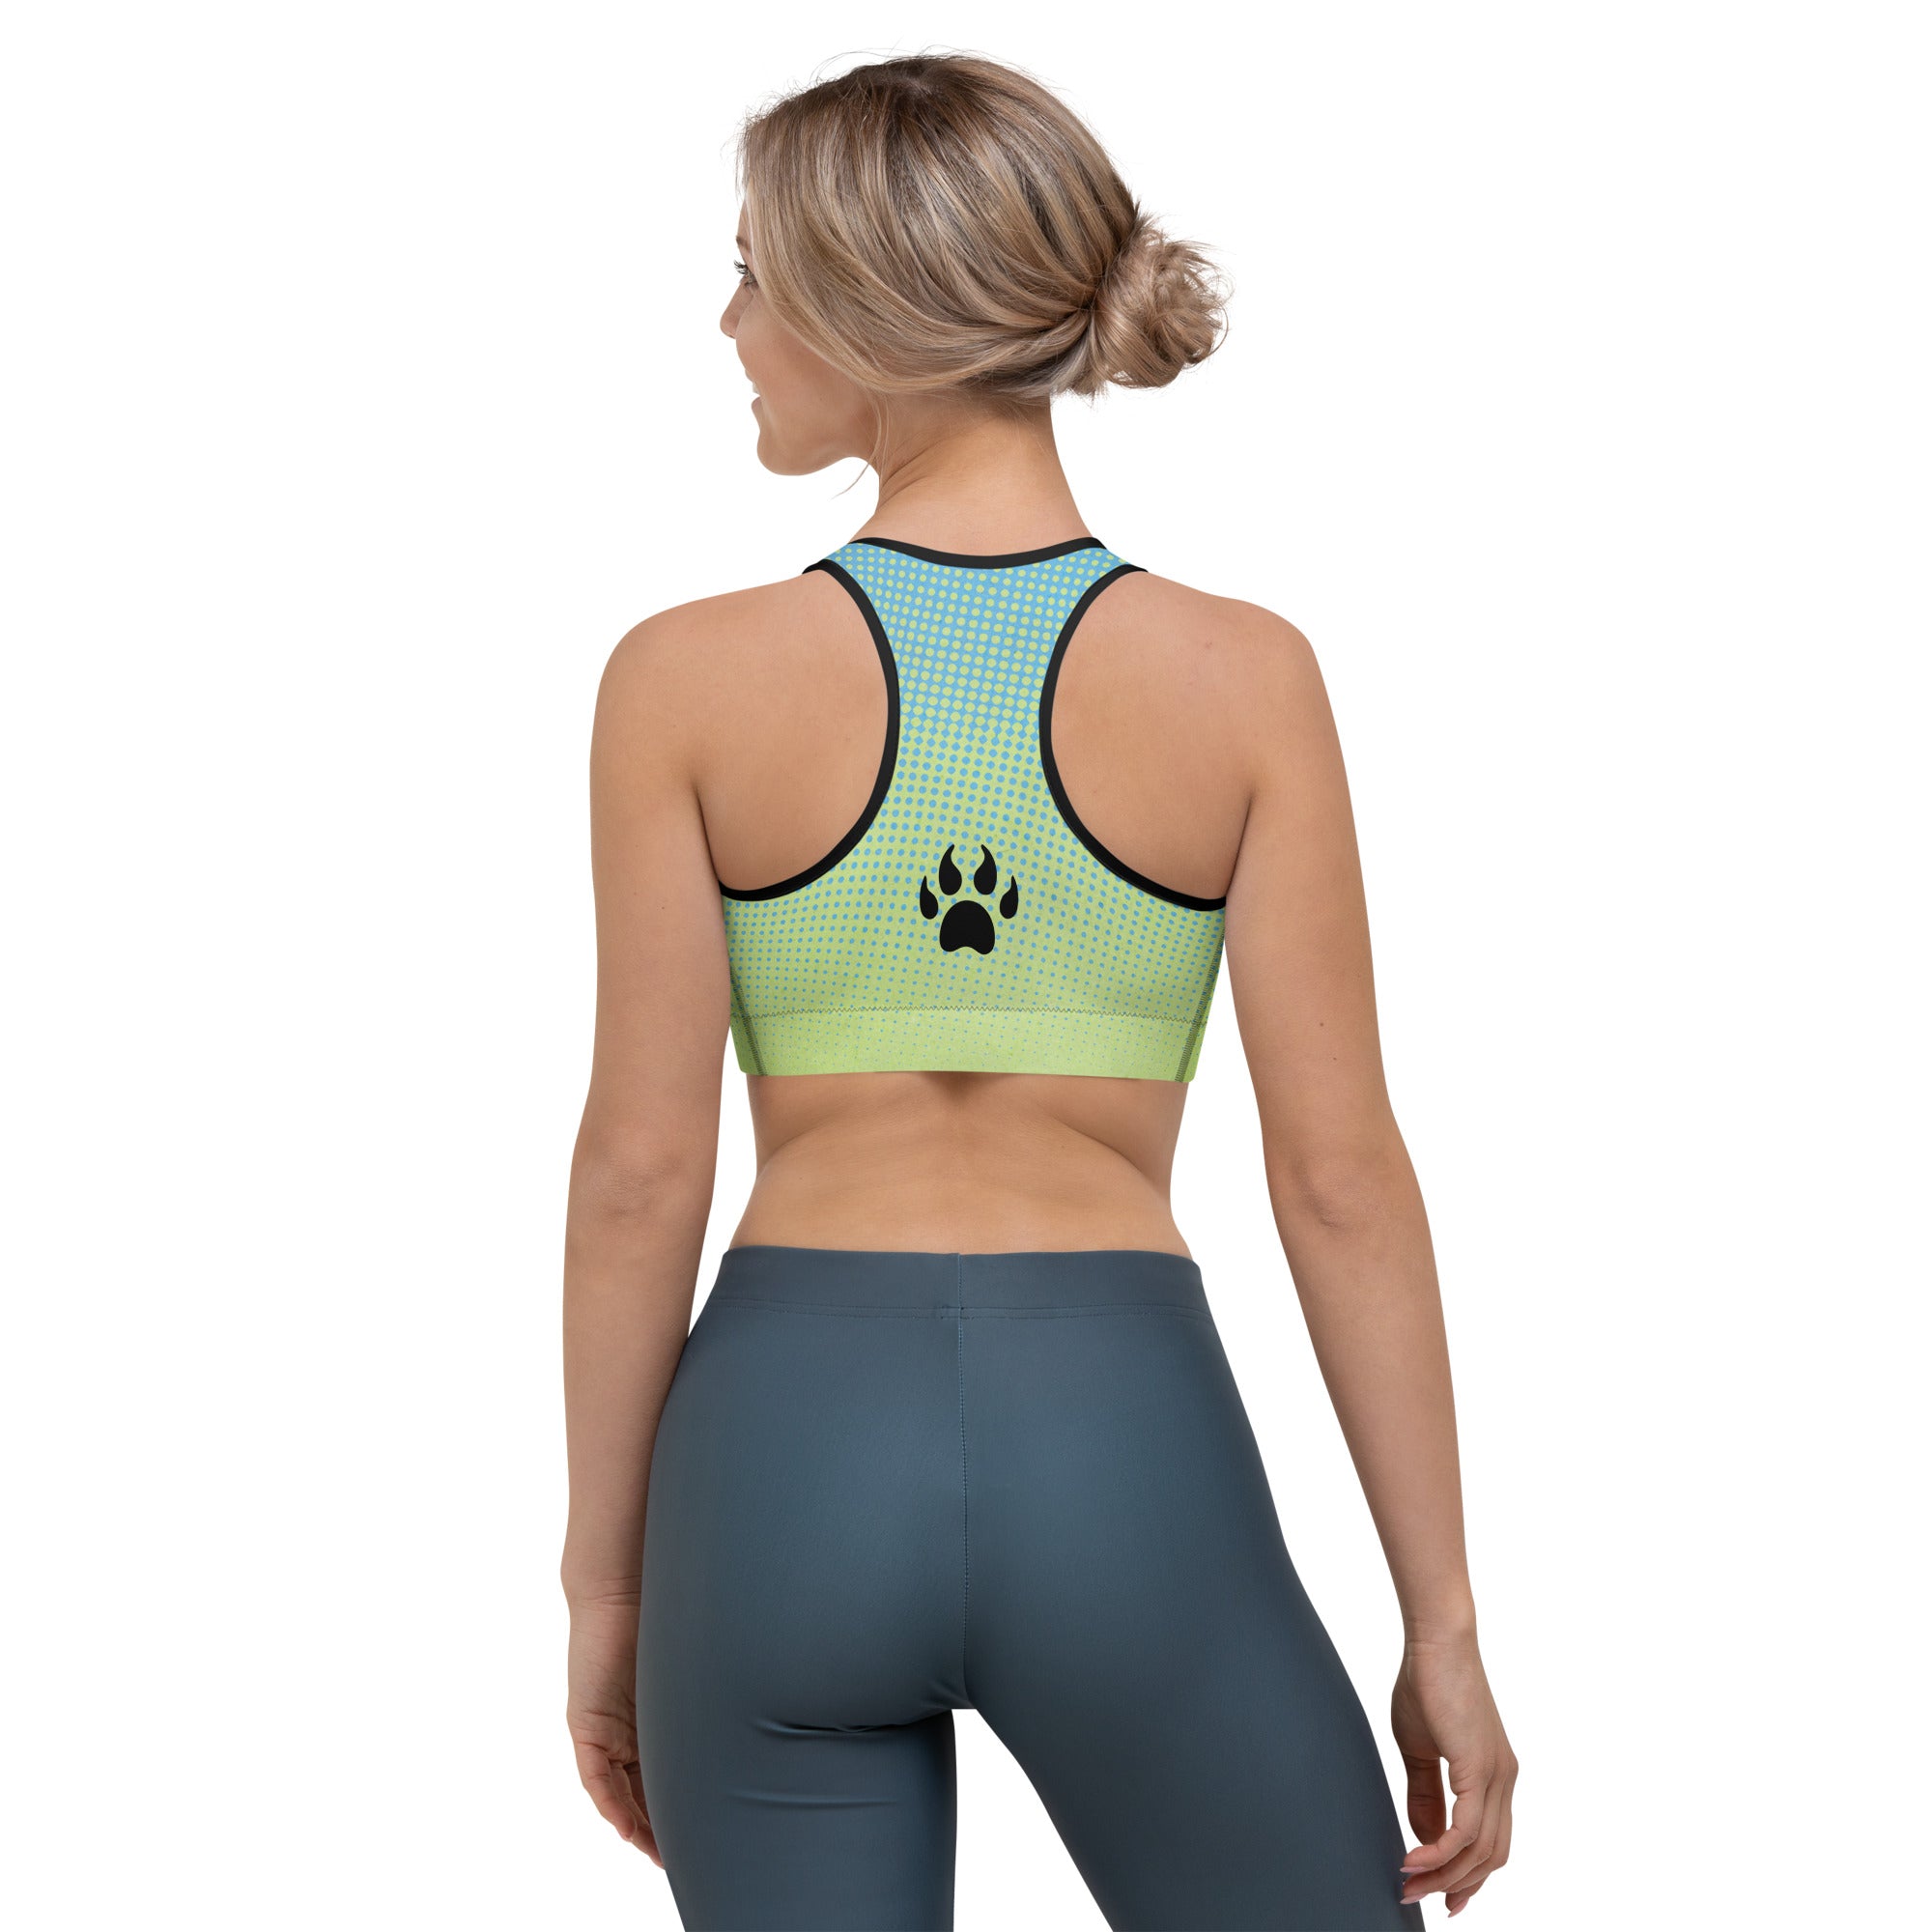 the back view of a woman wearing a Sweetest Paw Sports Bra Multi top.